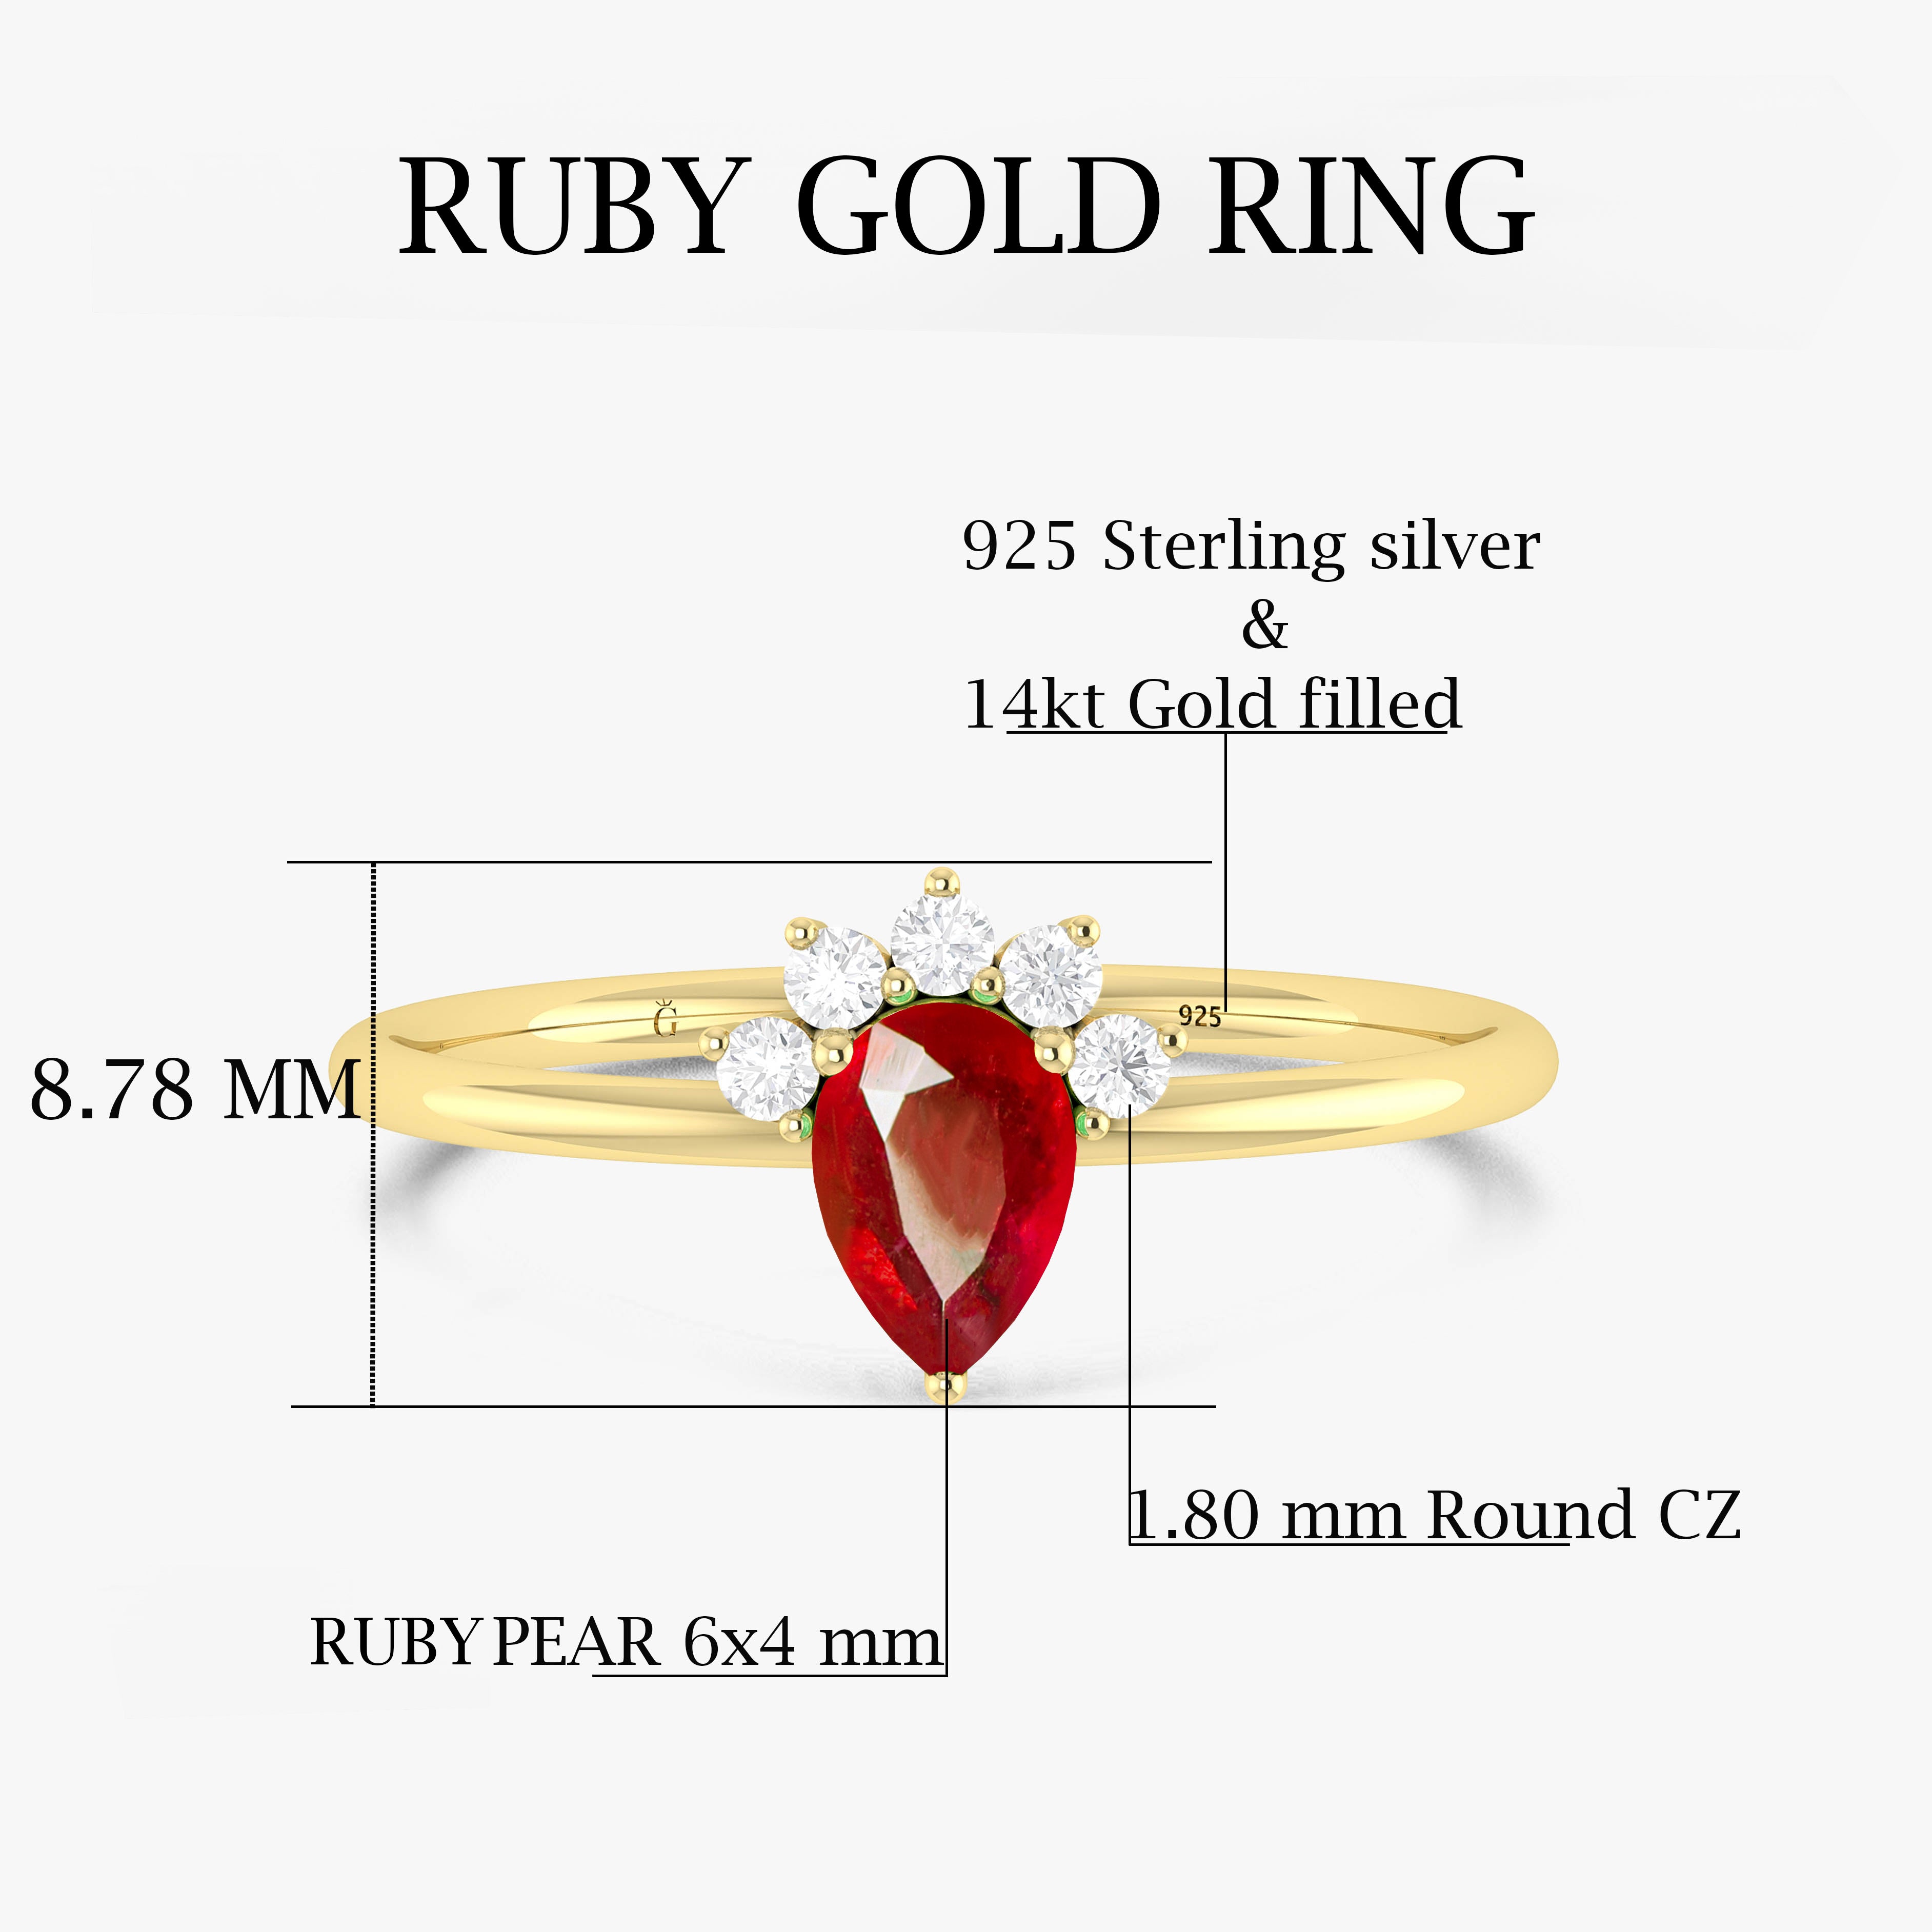 Ruby Gold RIng